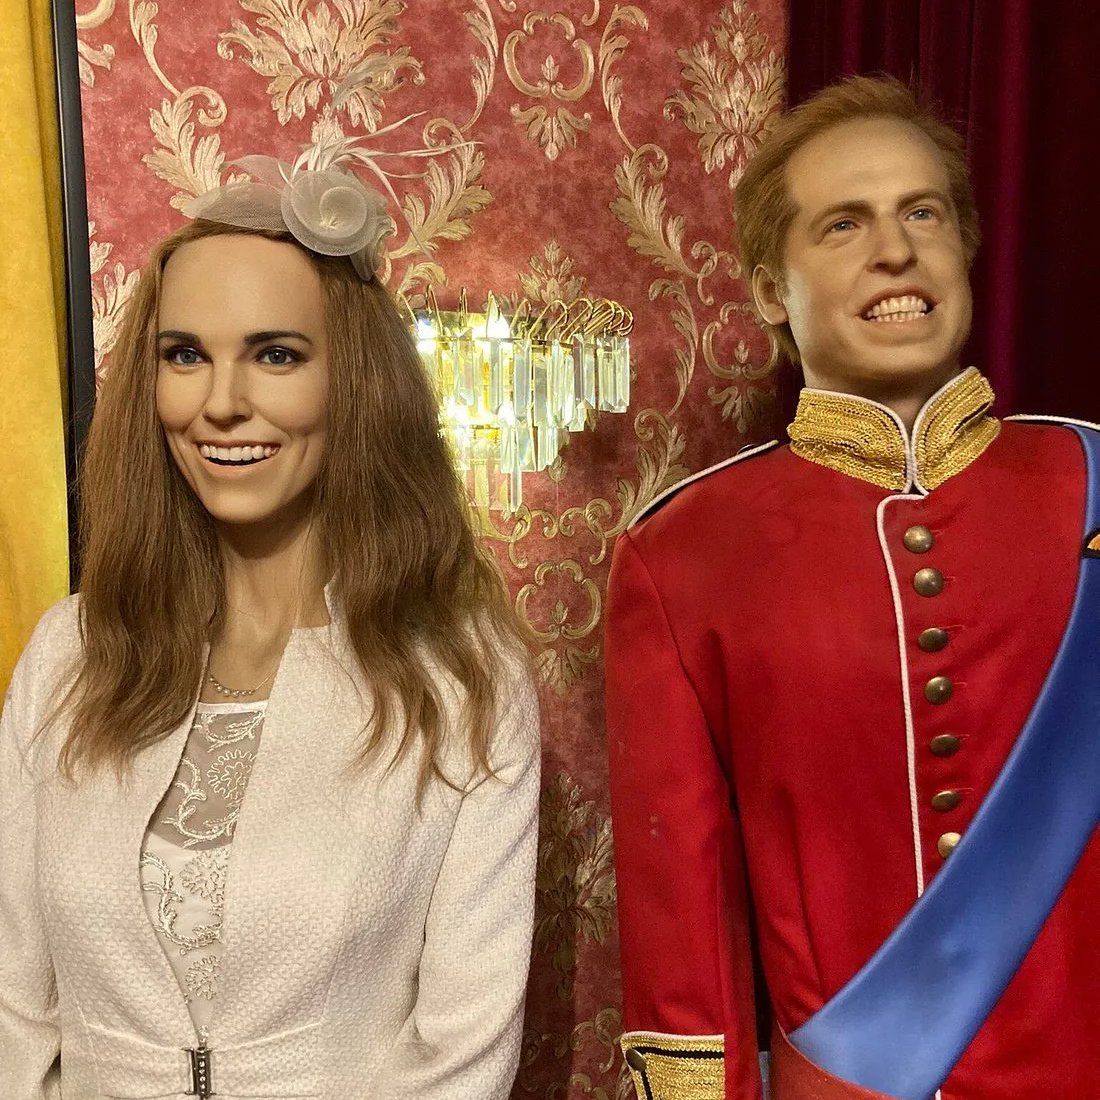 The Palace release new undoctored photo of a happy Kate and William to calm all the controversy. #KateMiddleton